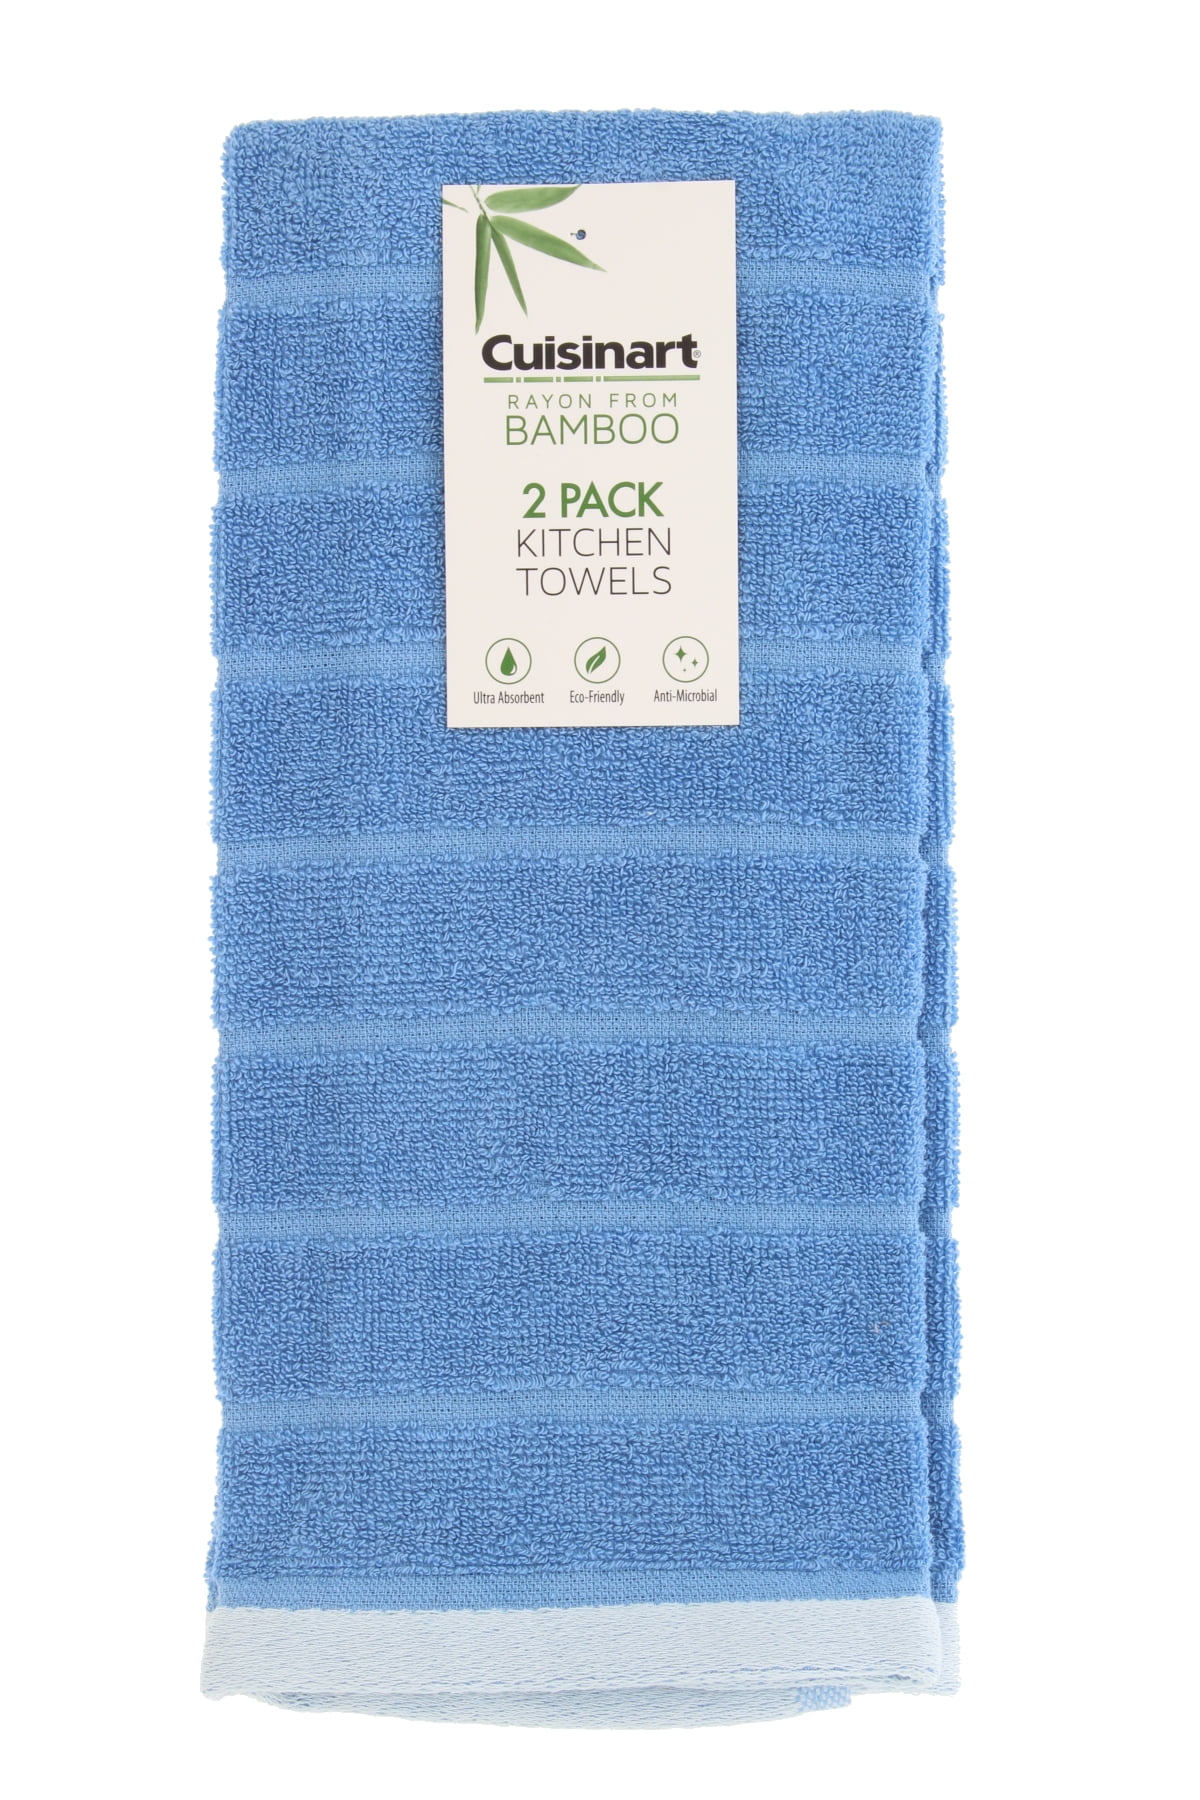 Reusable Tea Towels and Ultra Soft Bar Towels 8 Pack Kitchen Dish Towels CHOOBY Super Absorbent Fast Drying Kitchen Rags Nonstick Oil Dish Cloths 